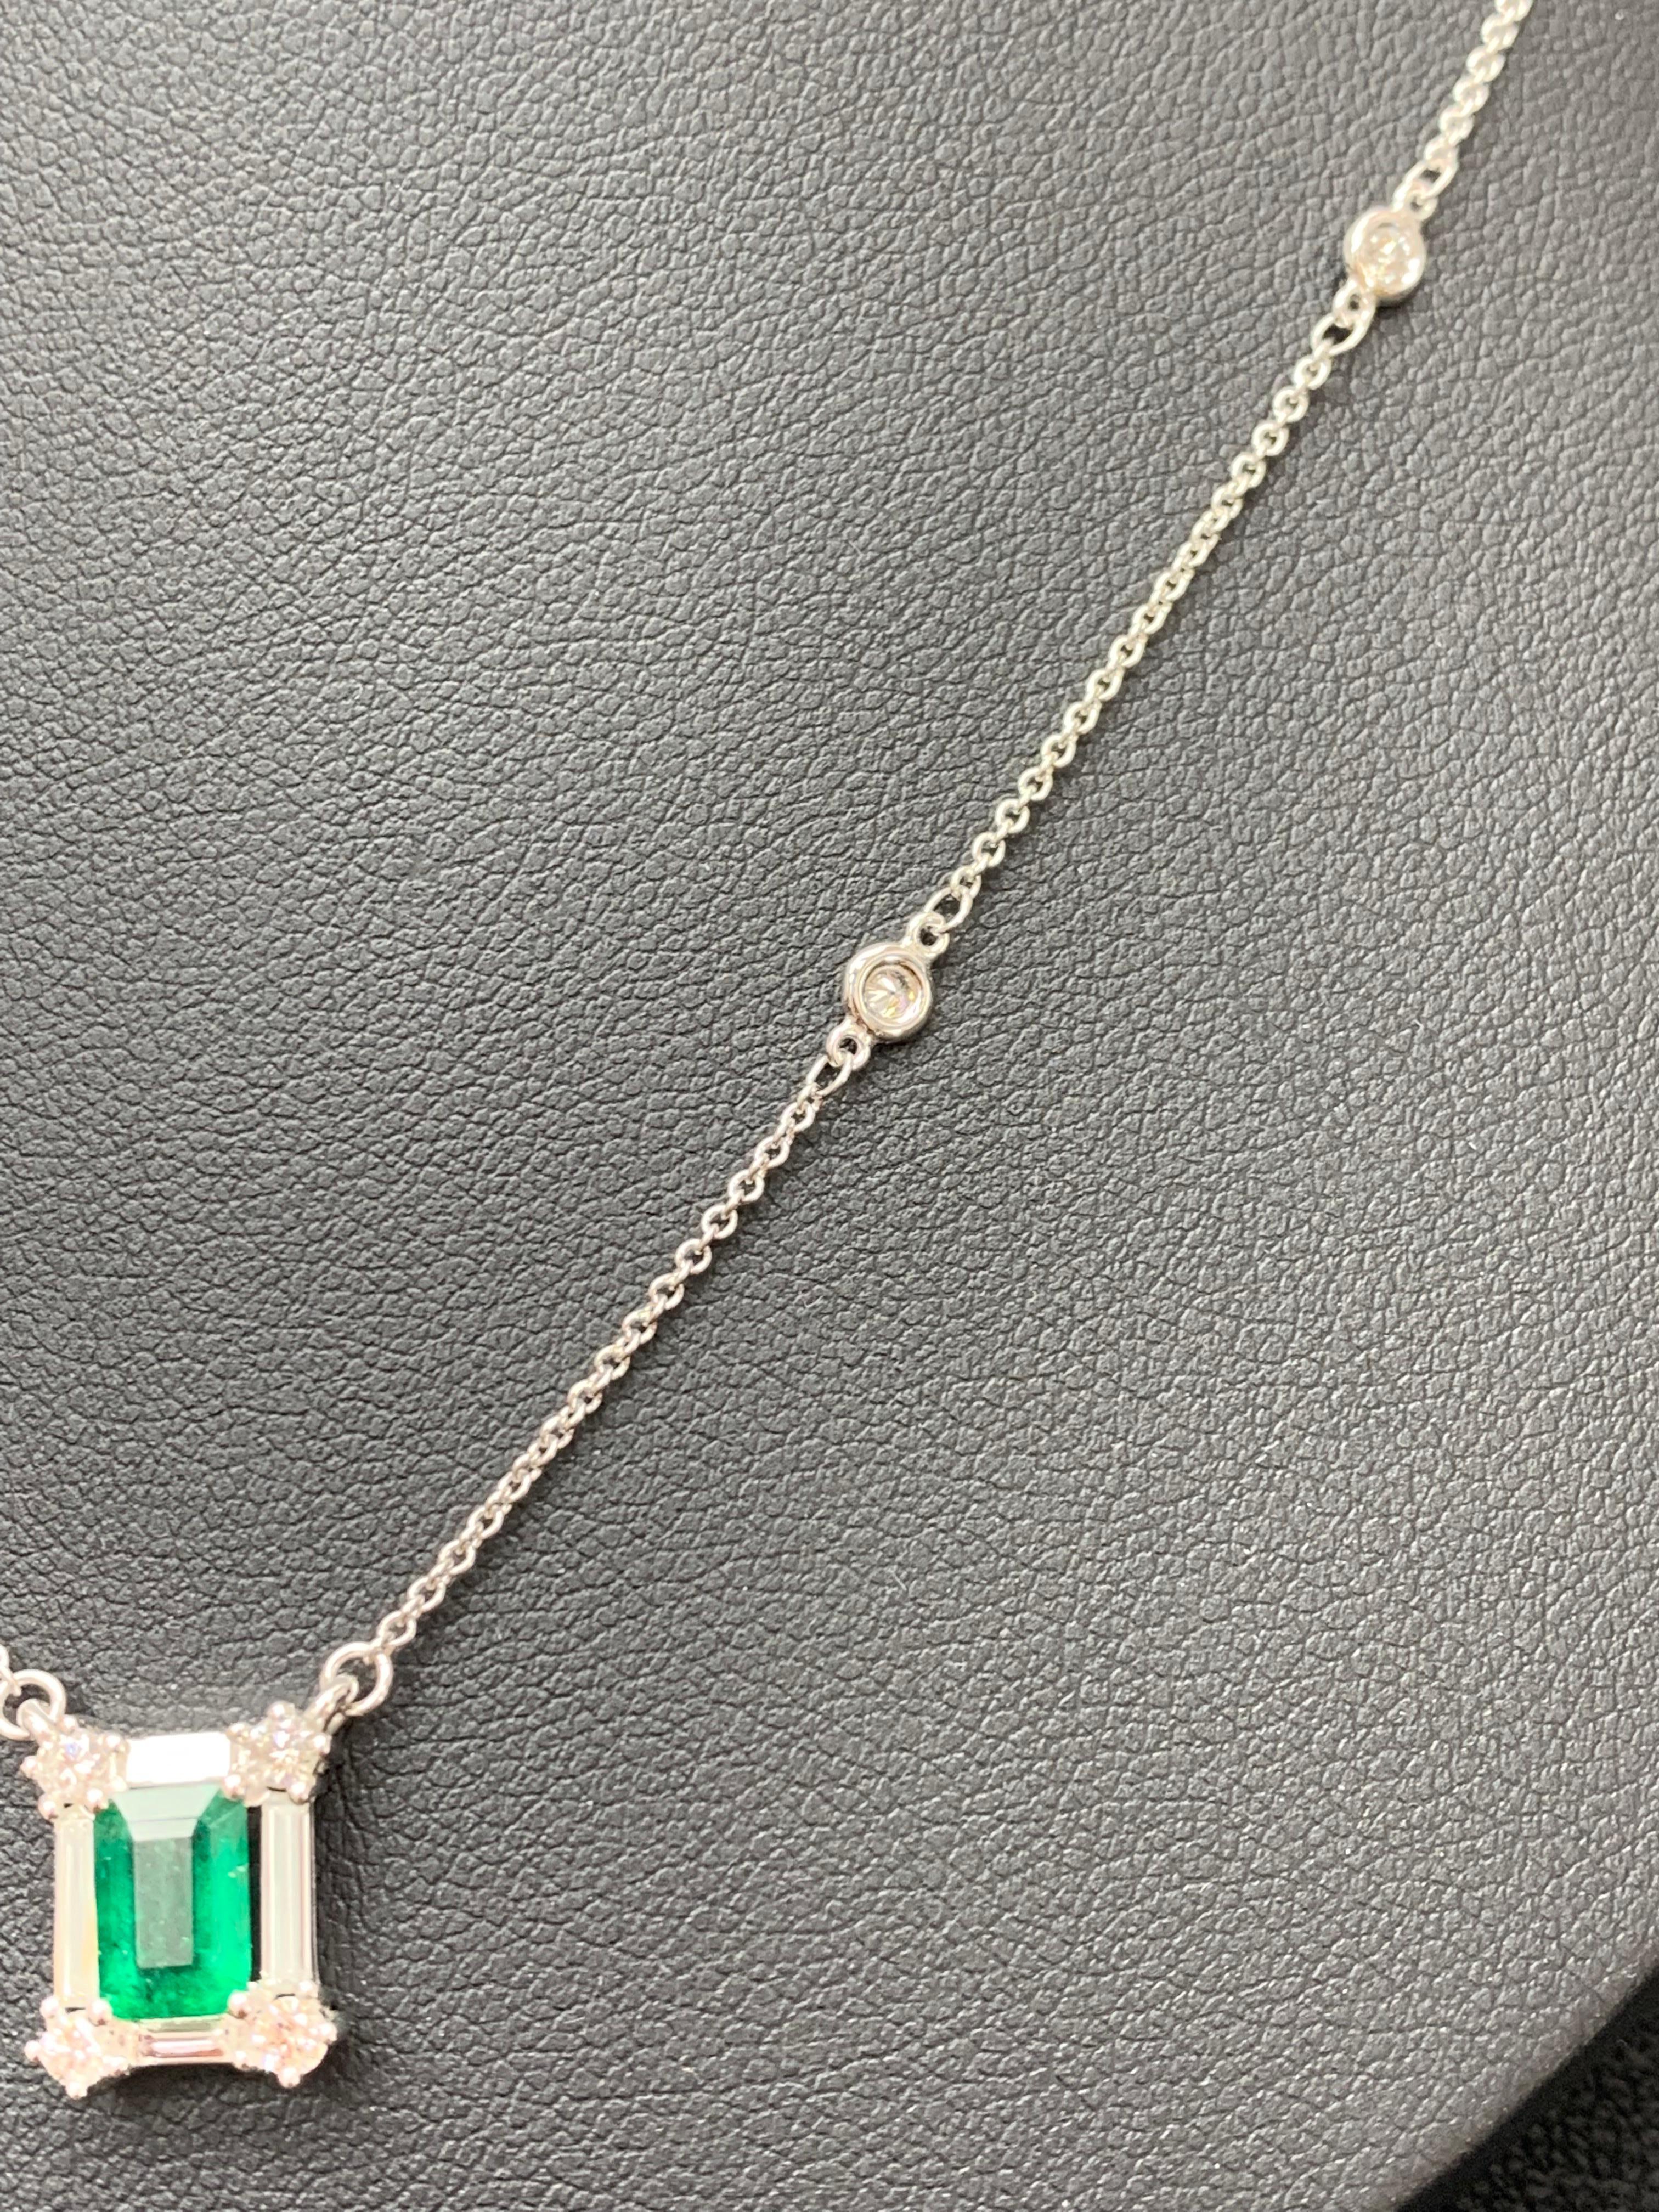 Modern 0.90 Carat Emerald Cut Emerald and Diamond Pendant Necklace in 14K White Gold For Sale